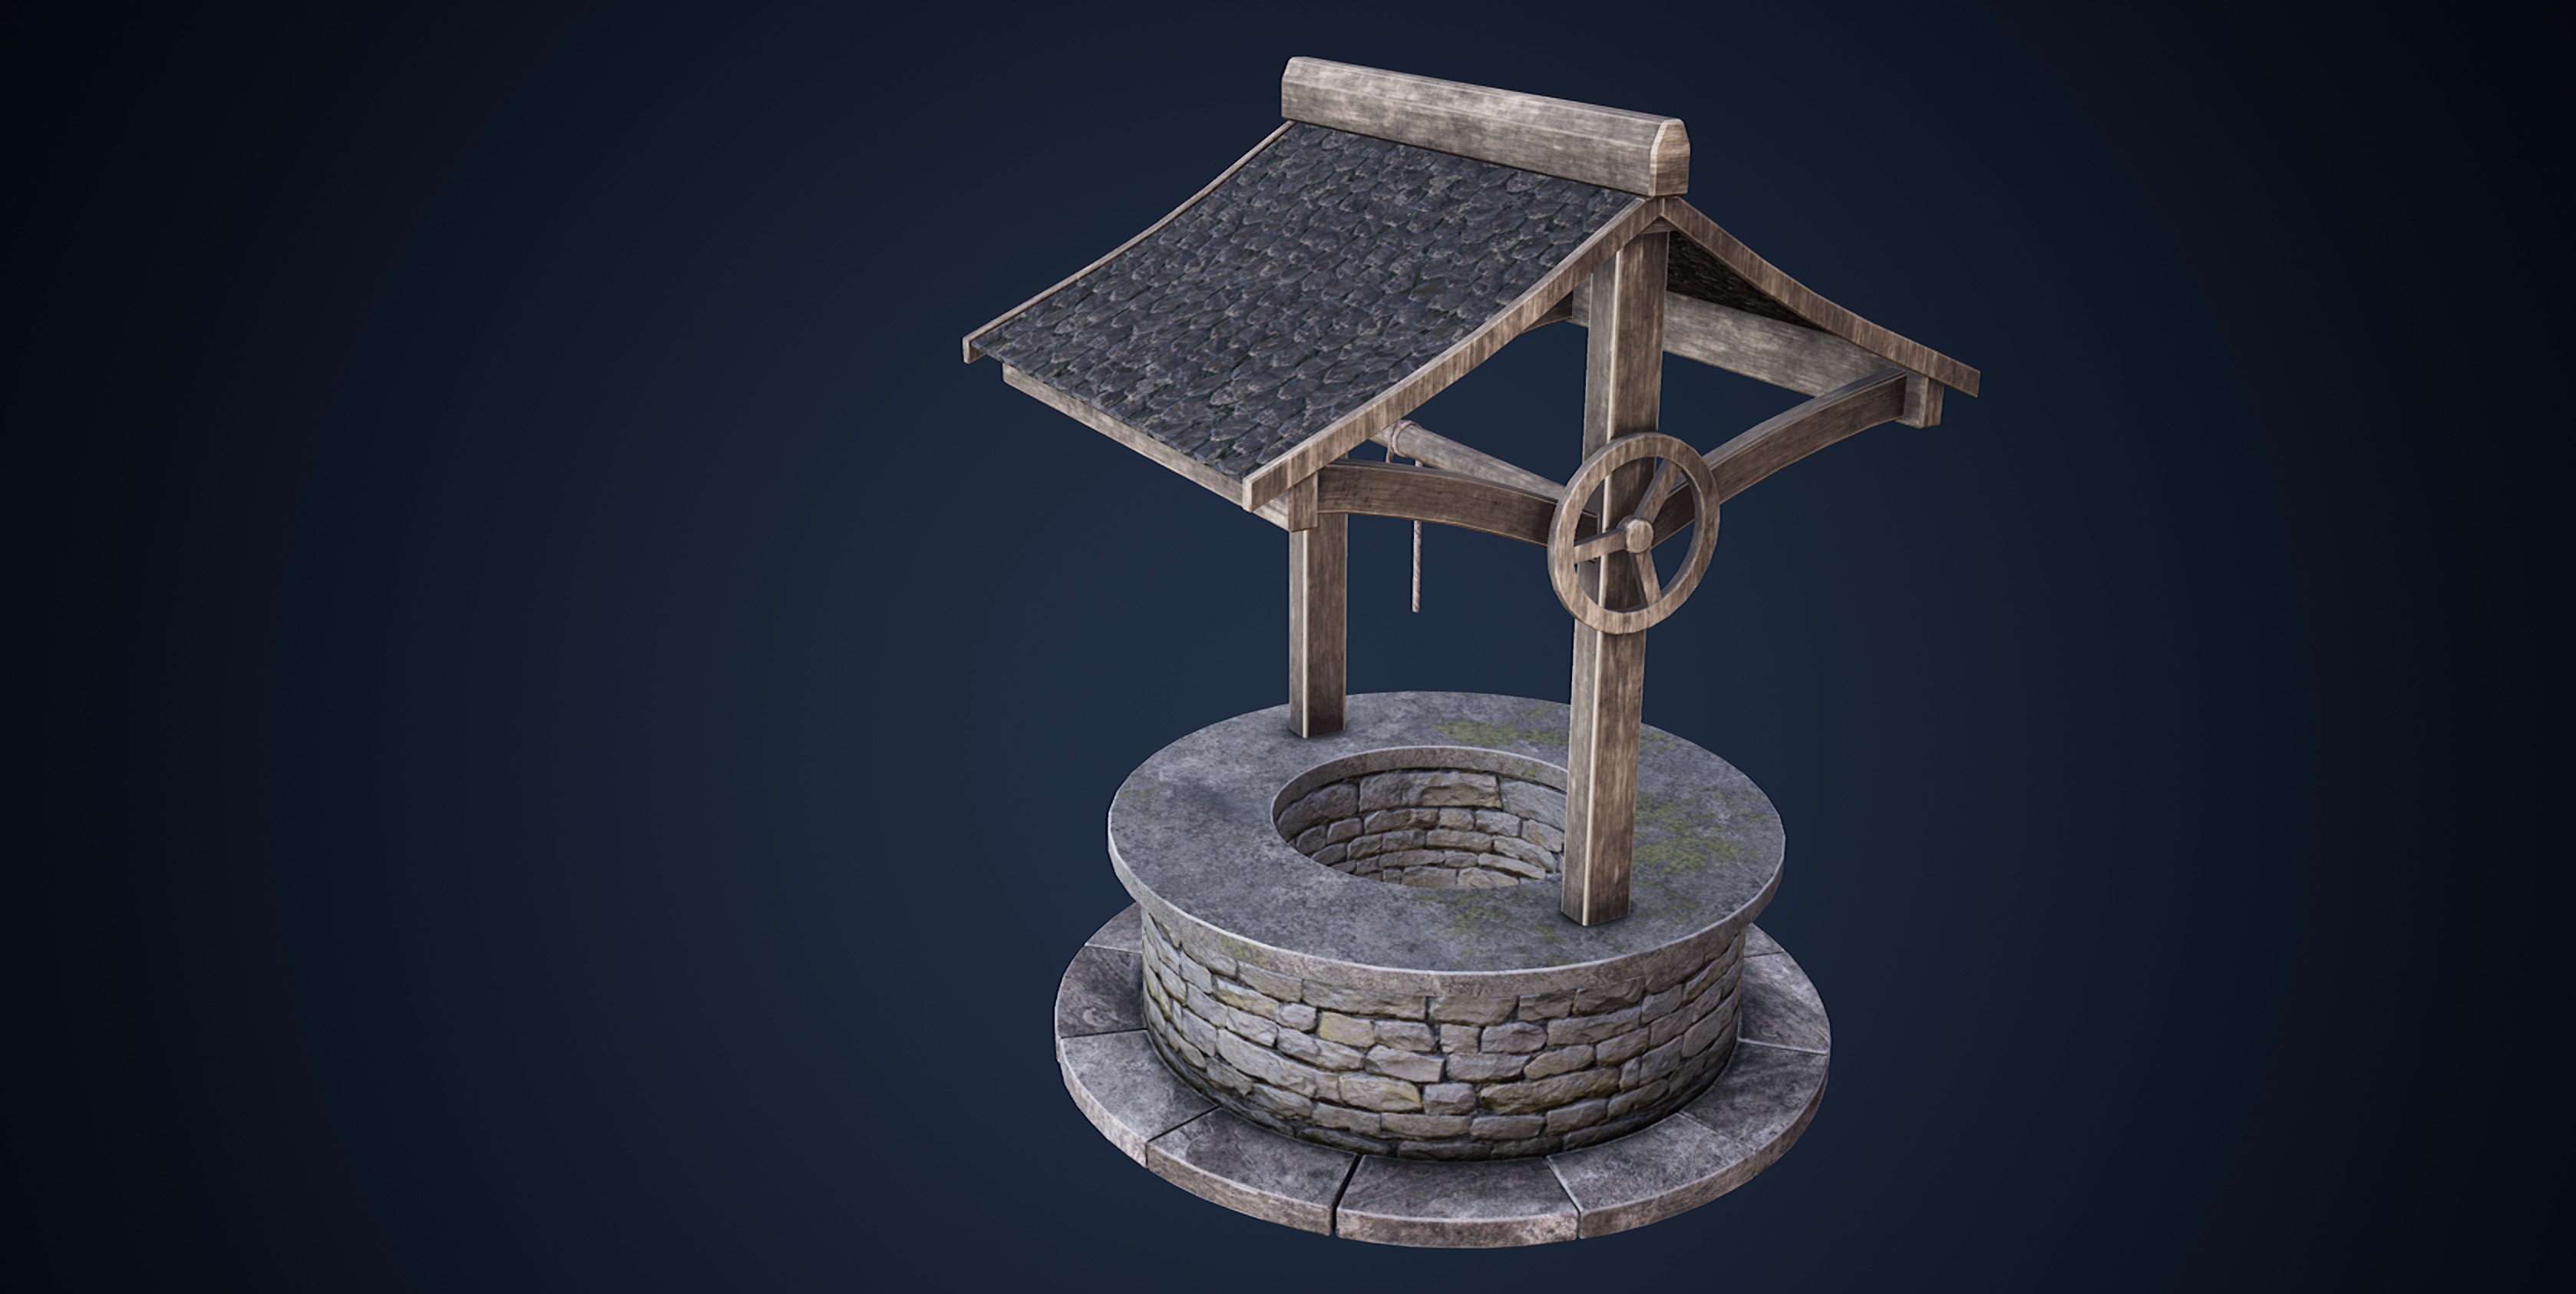 A Well (Painted with Substance)